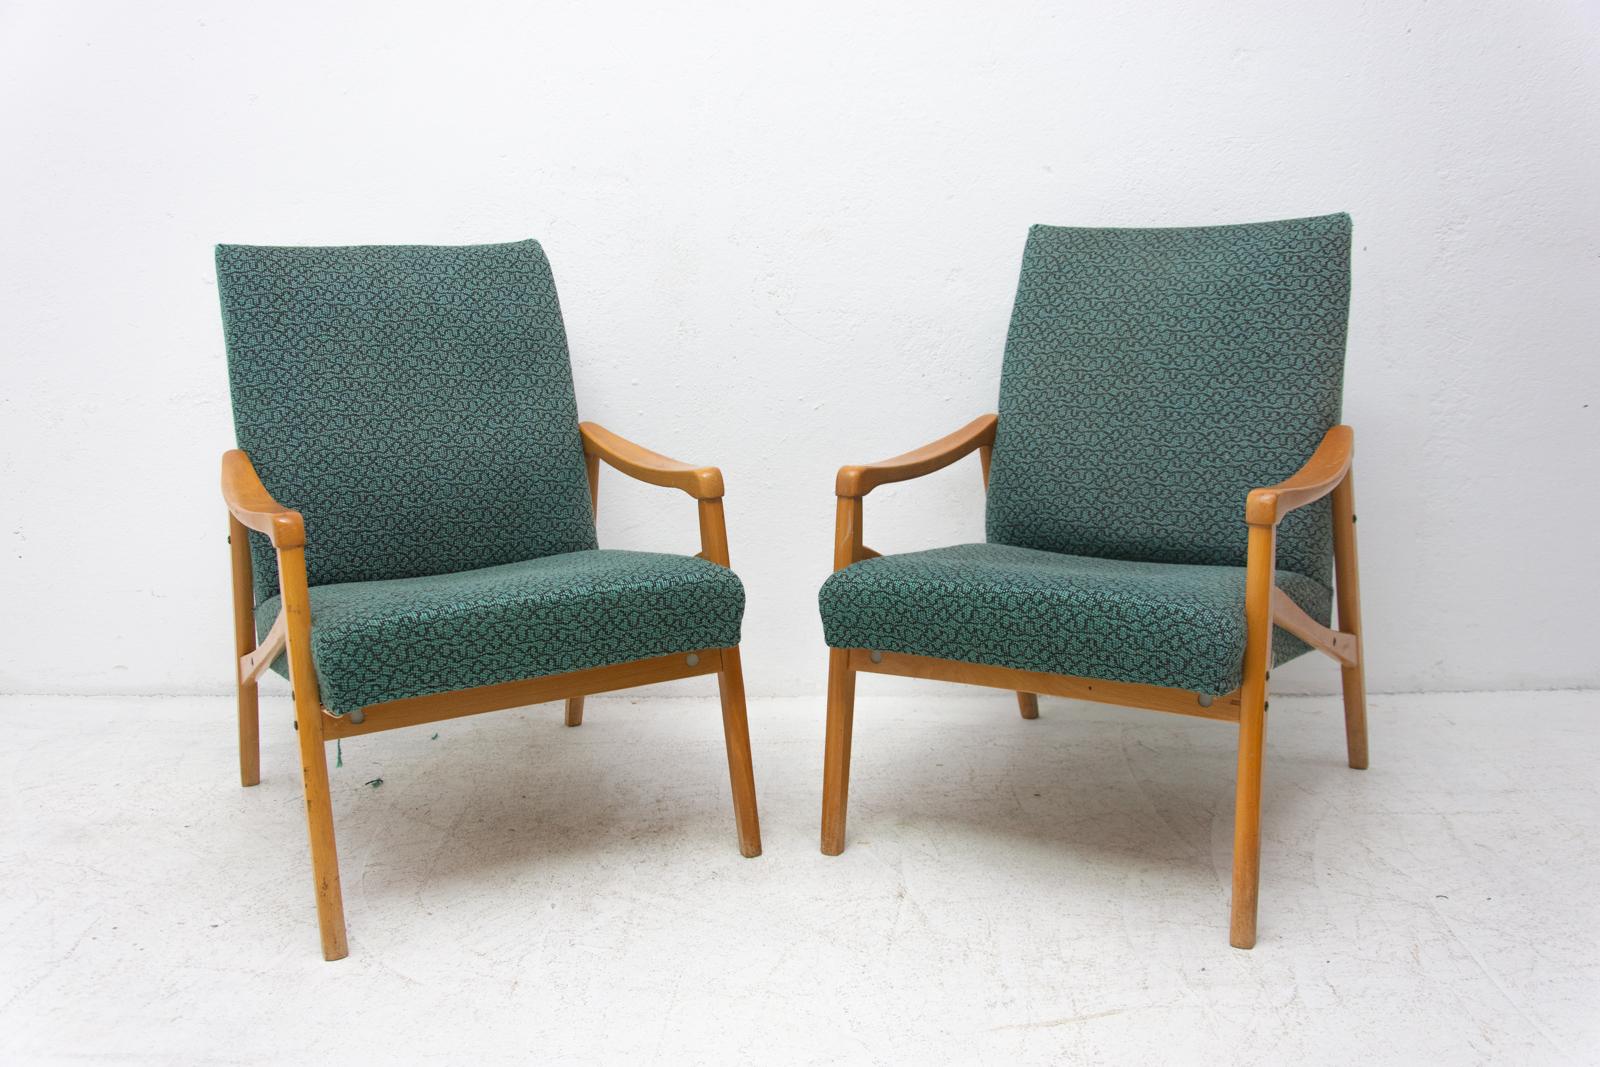 A pair of armchairs, made in the former Czechoslovakia in the 1970s. It was designed by Jirí Jiroutek for Interiér Praha as part of U-550 living room set. The structure is made of beech wood and the chairs have original upholstery. The chairs are in